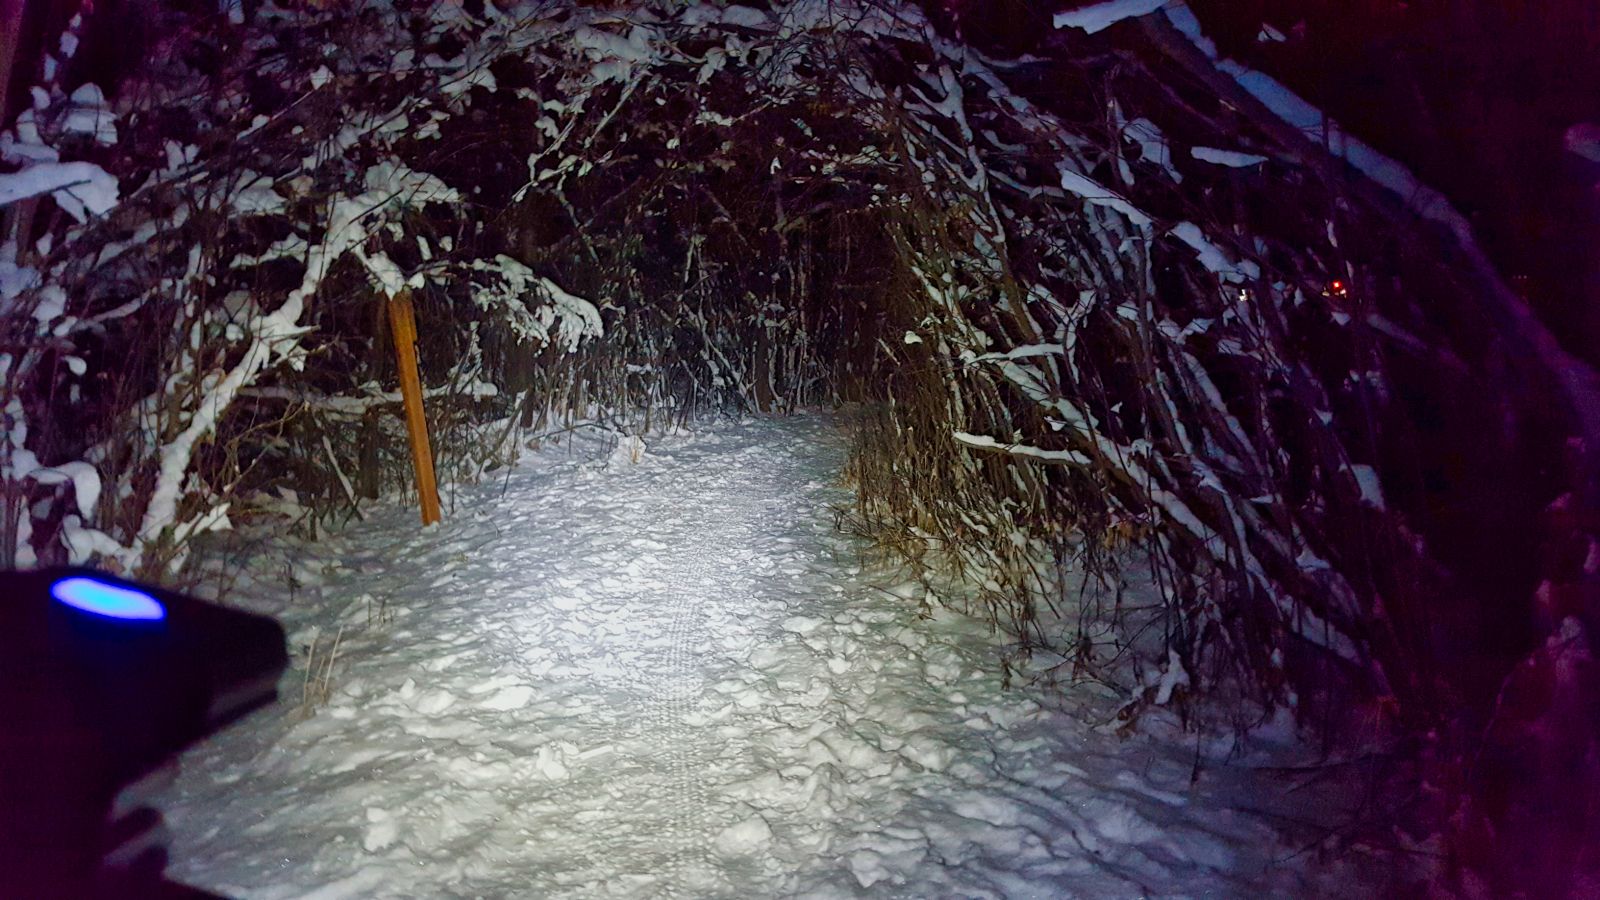 Snow packed mountain bike trail lit up by a bright light